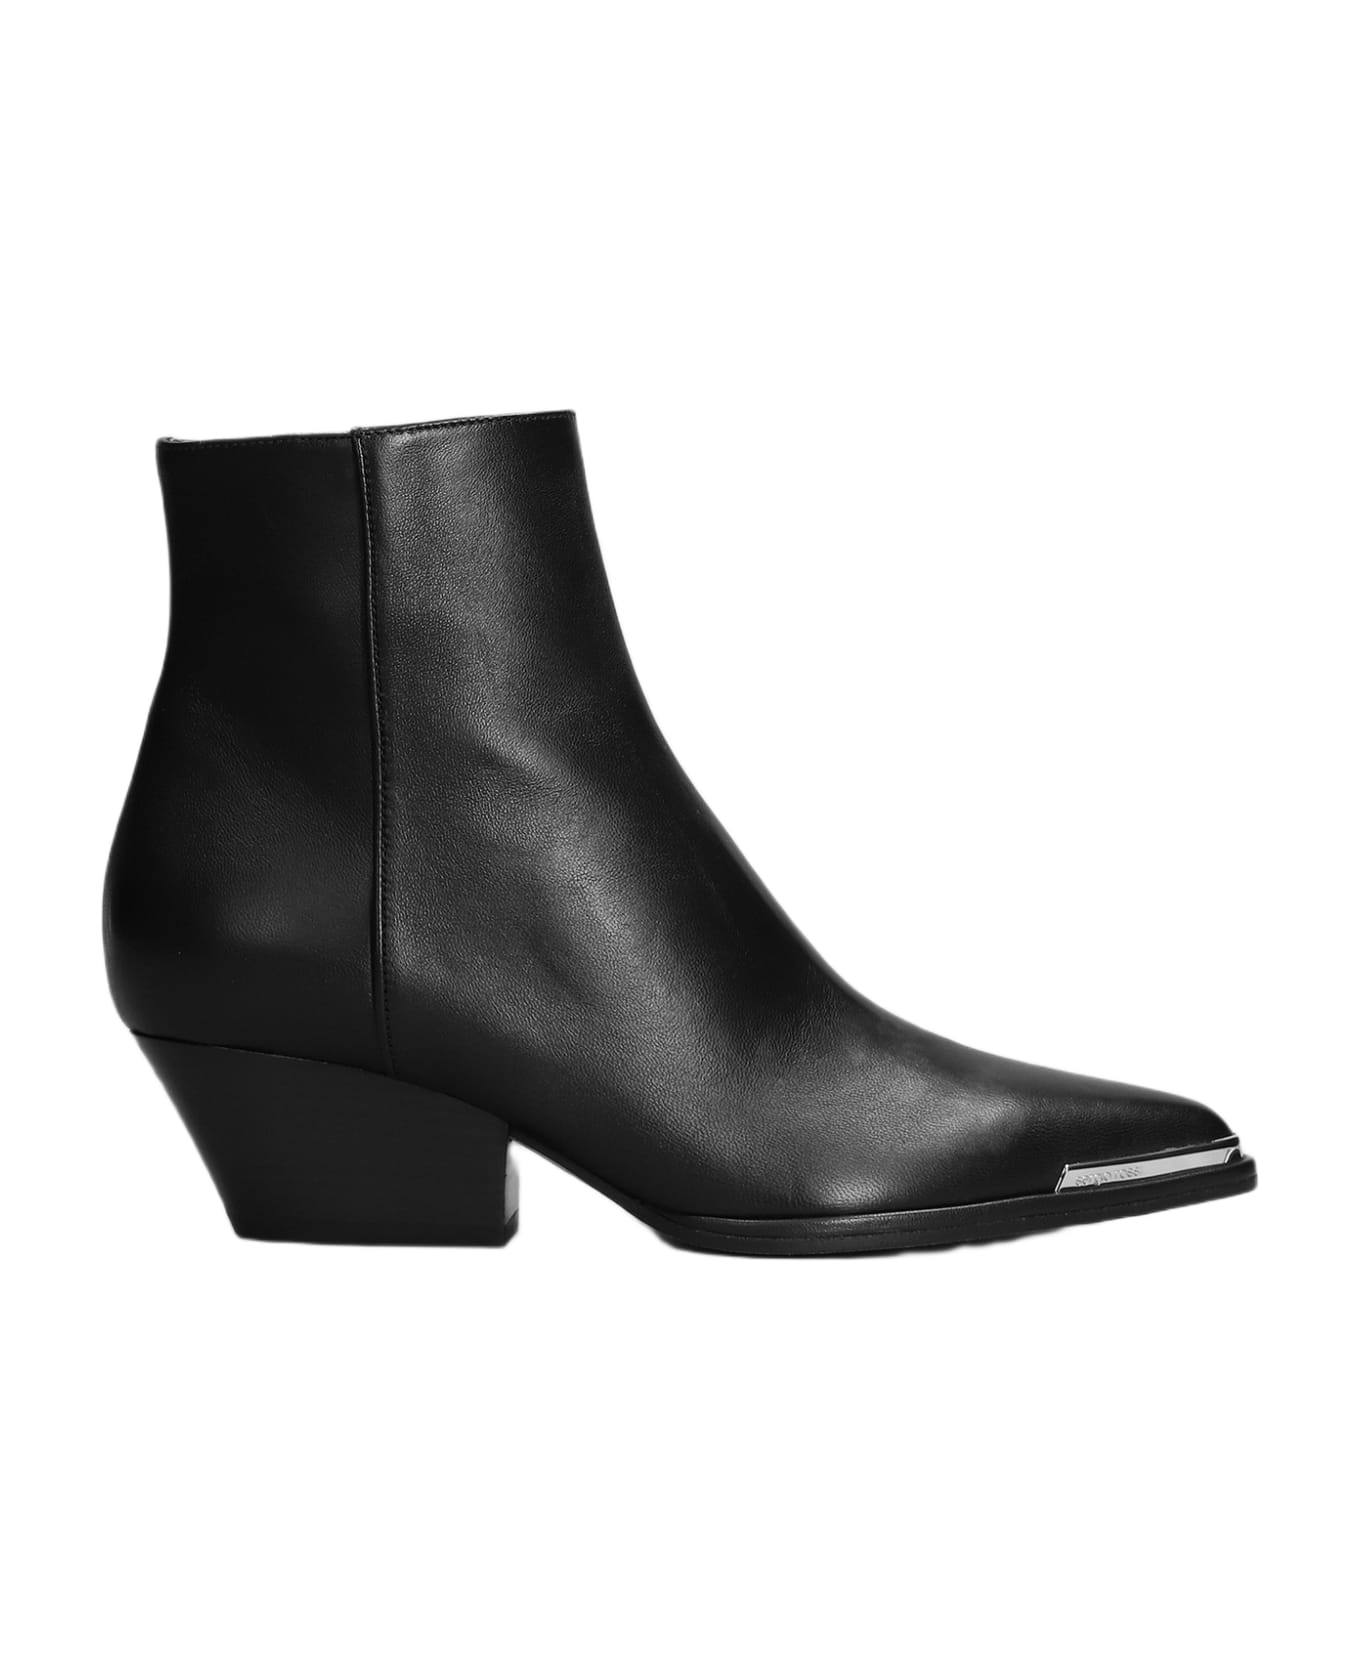 Sergio Rossi High Heels Ankle Boots In Black Leather - black